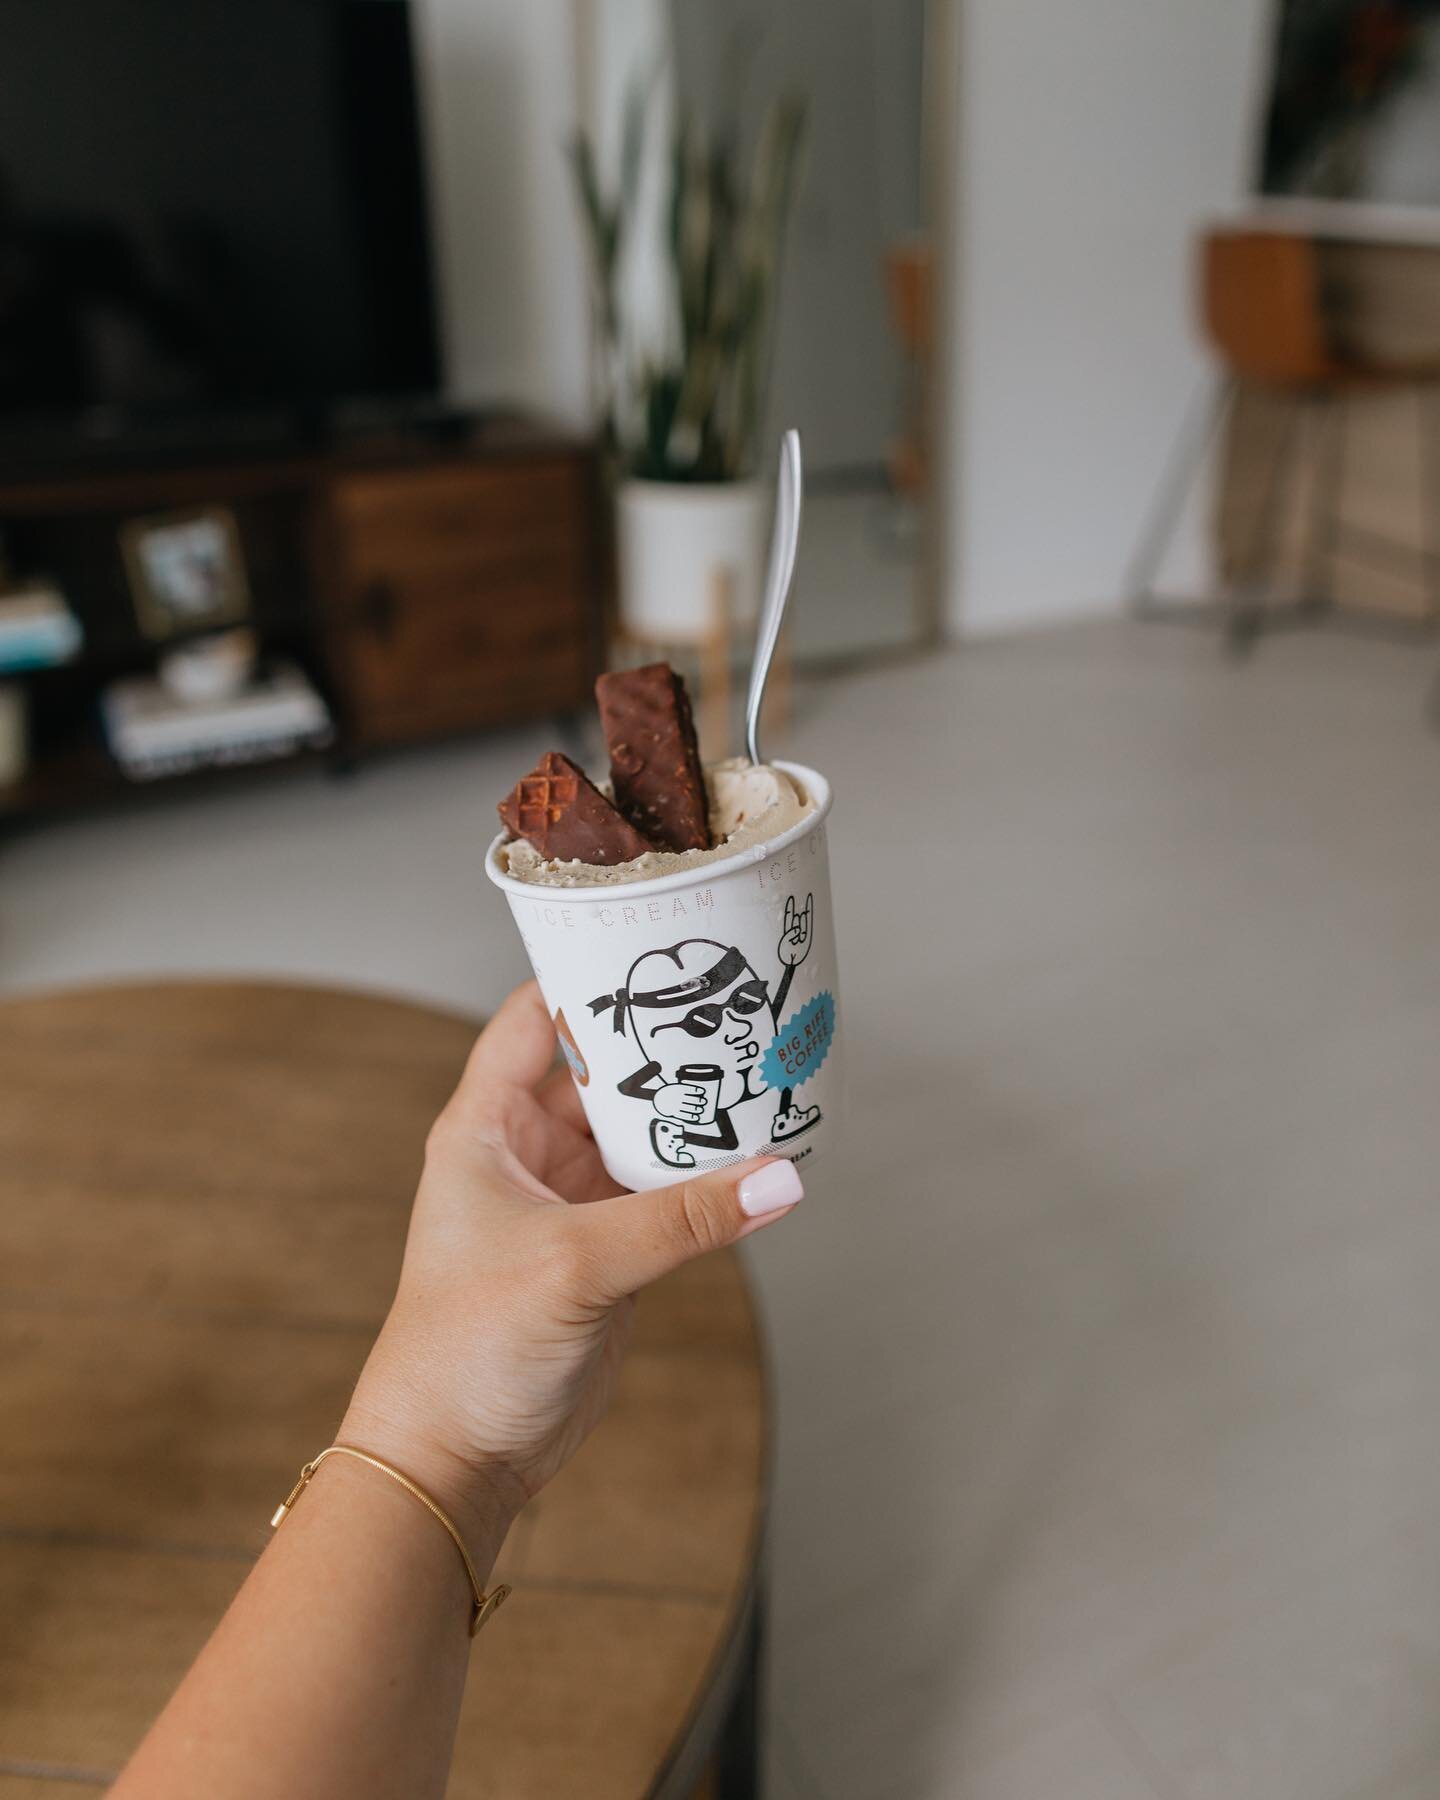 Foxtrot + chill, anyone? 😉

@foxtrotmarket recently released their own line of ice cream pints and this Big Riff Coffee flavor is my everything. It&rsquo;s made with a local fav, @metriccoffee 😍 + I paired it with their Sunny Buddies! 

I just fini